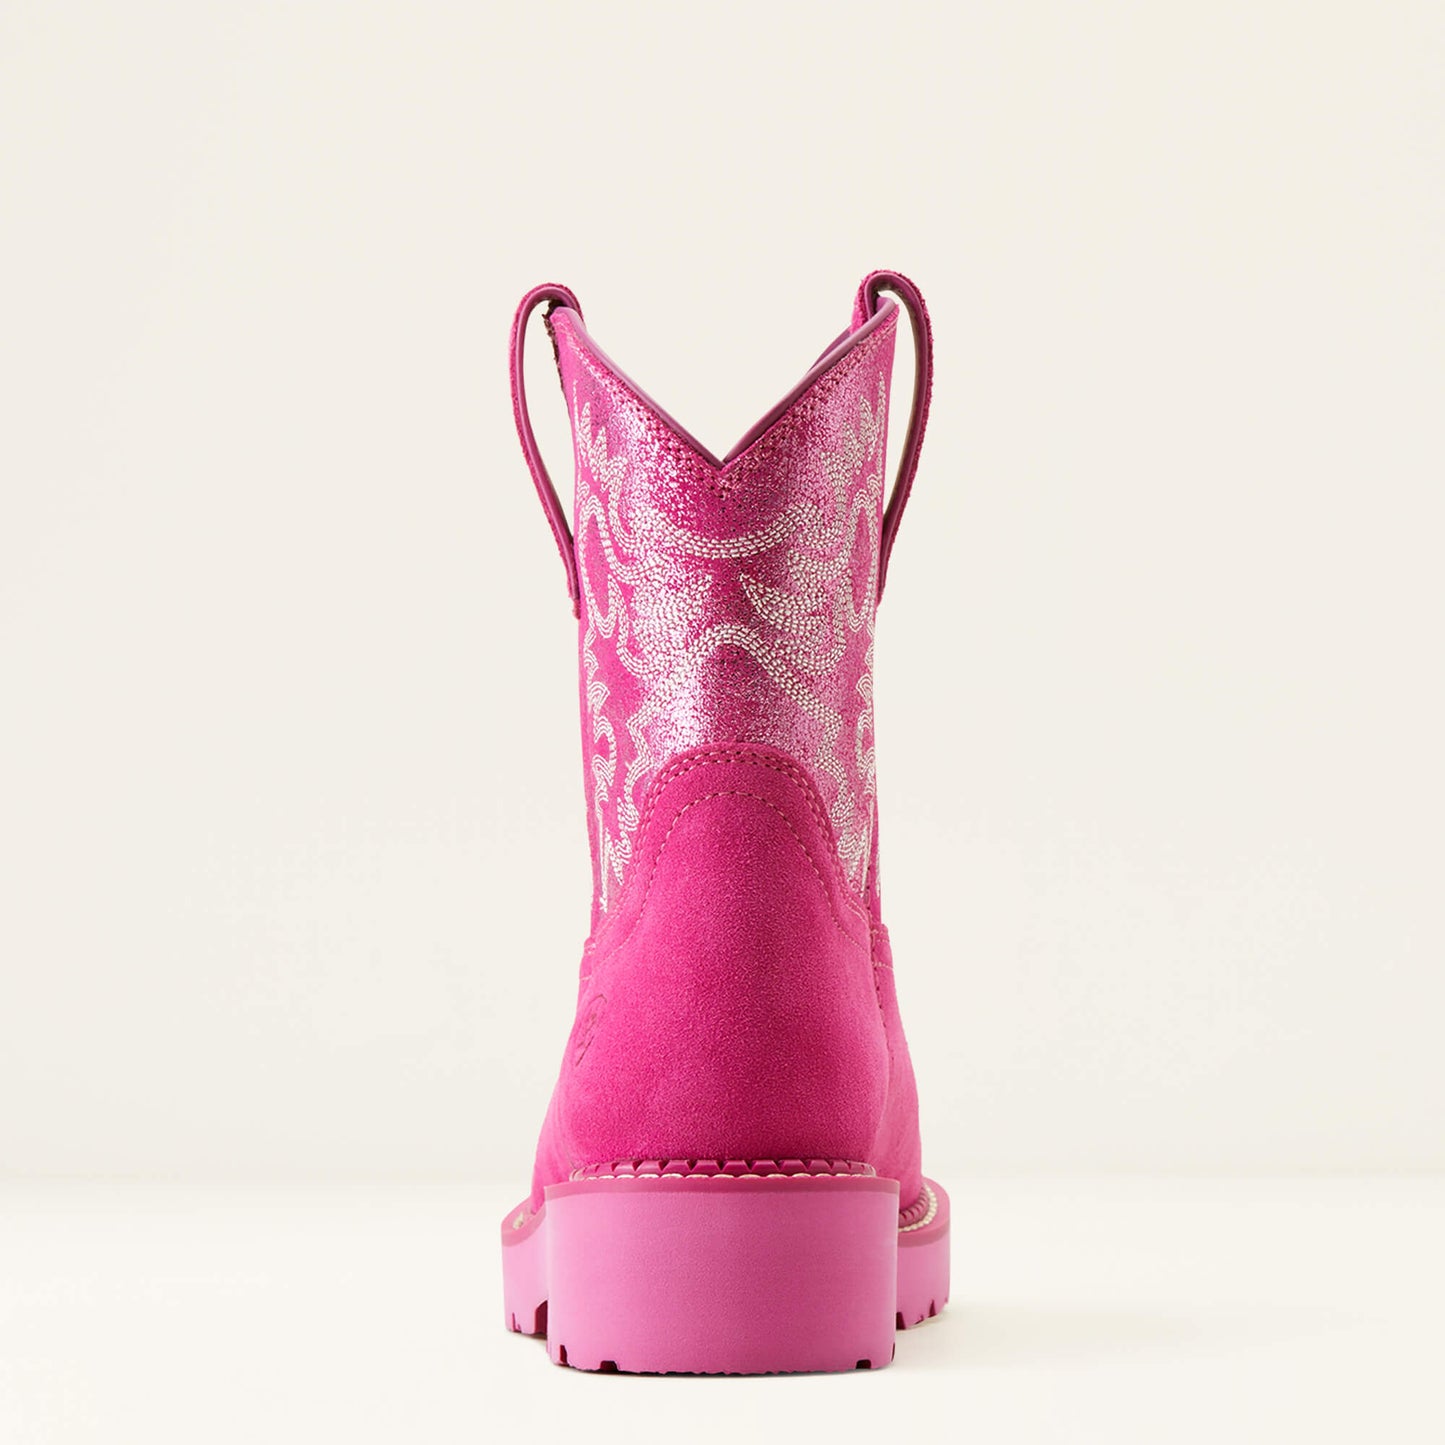 ARIAT WOMEN'S Style No. 10050997 Fatbaby Western Boot HOTTEST PINK|PINK METALLIC